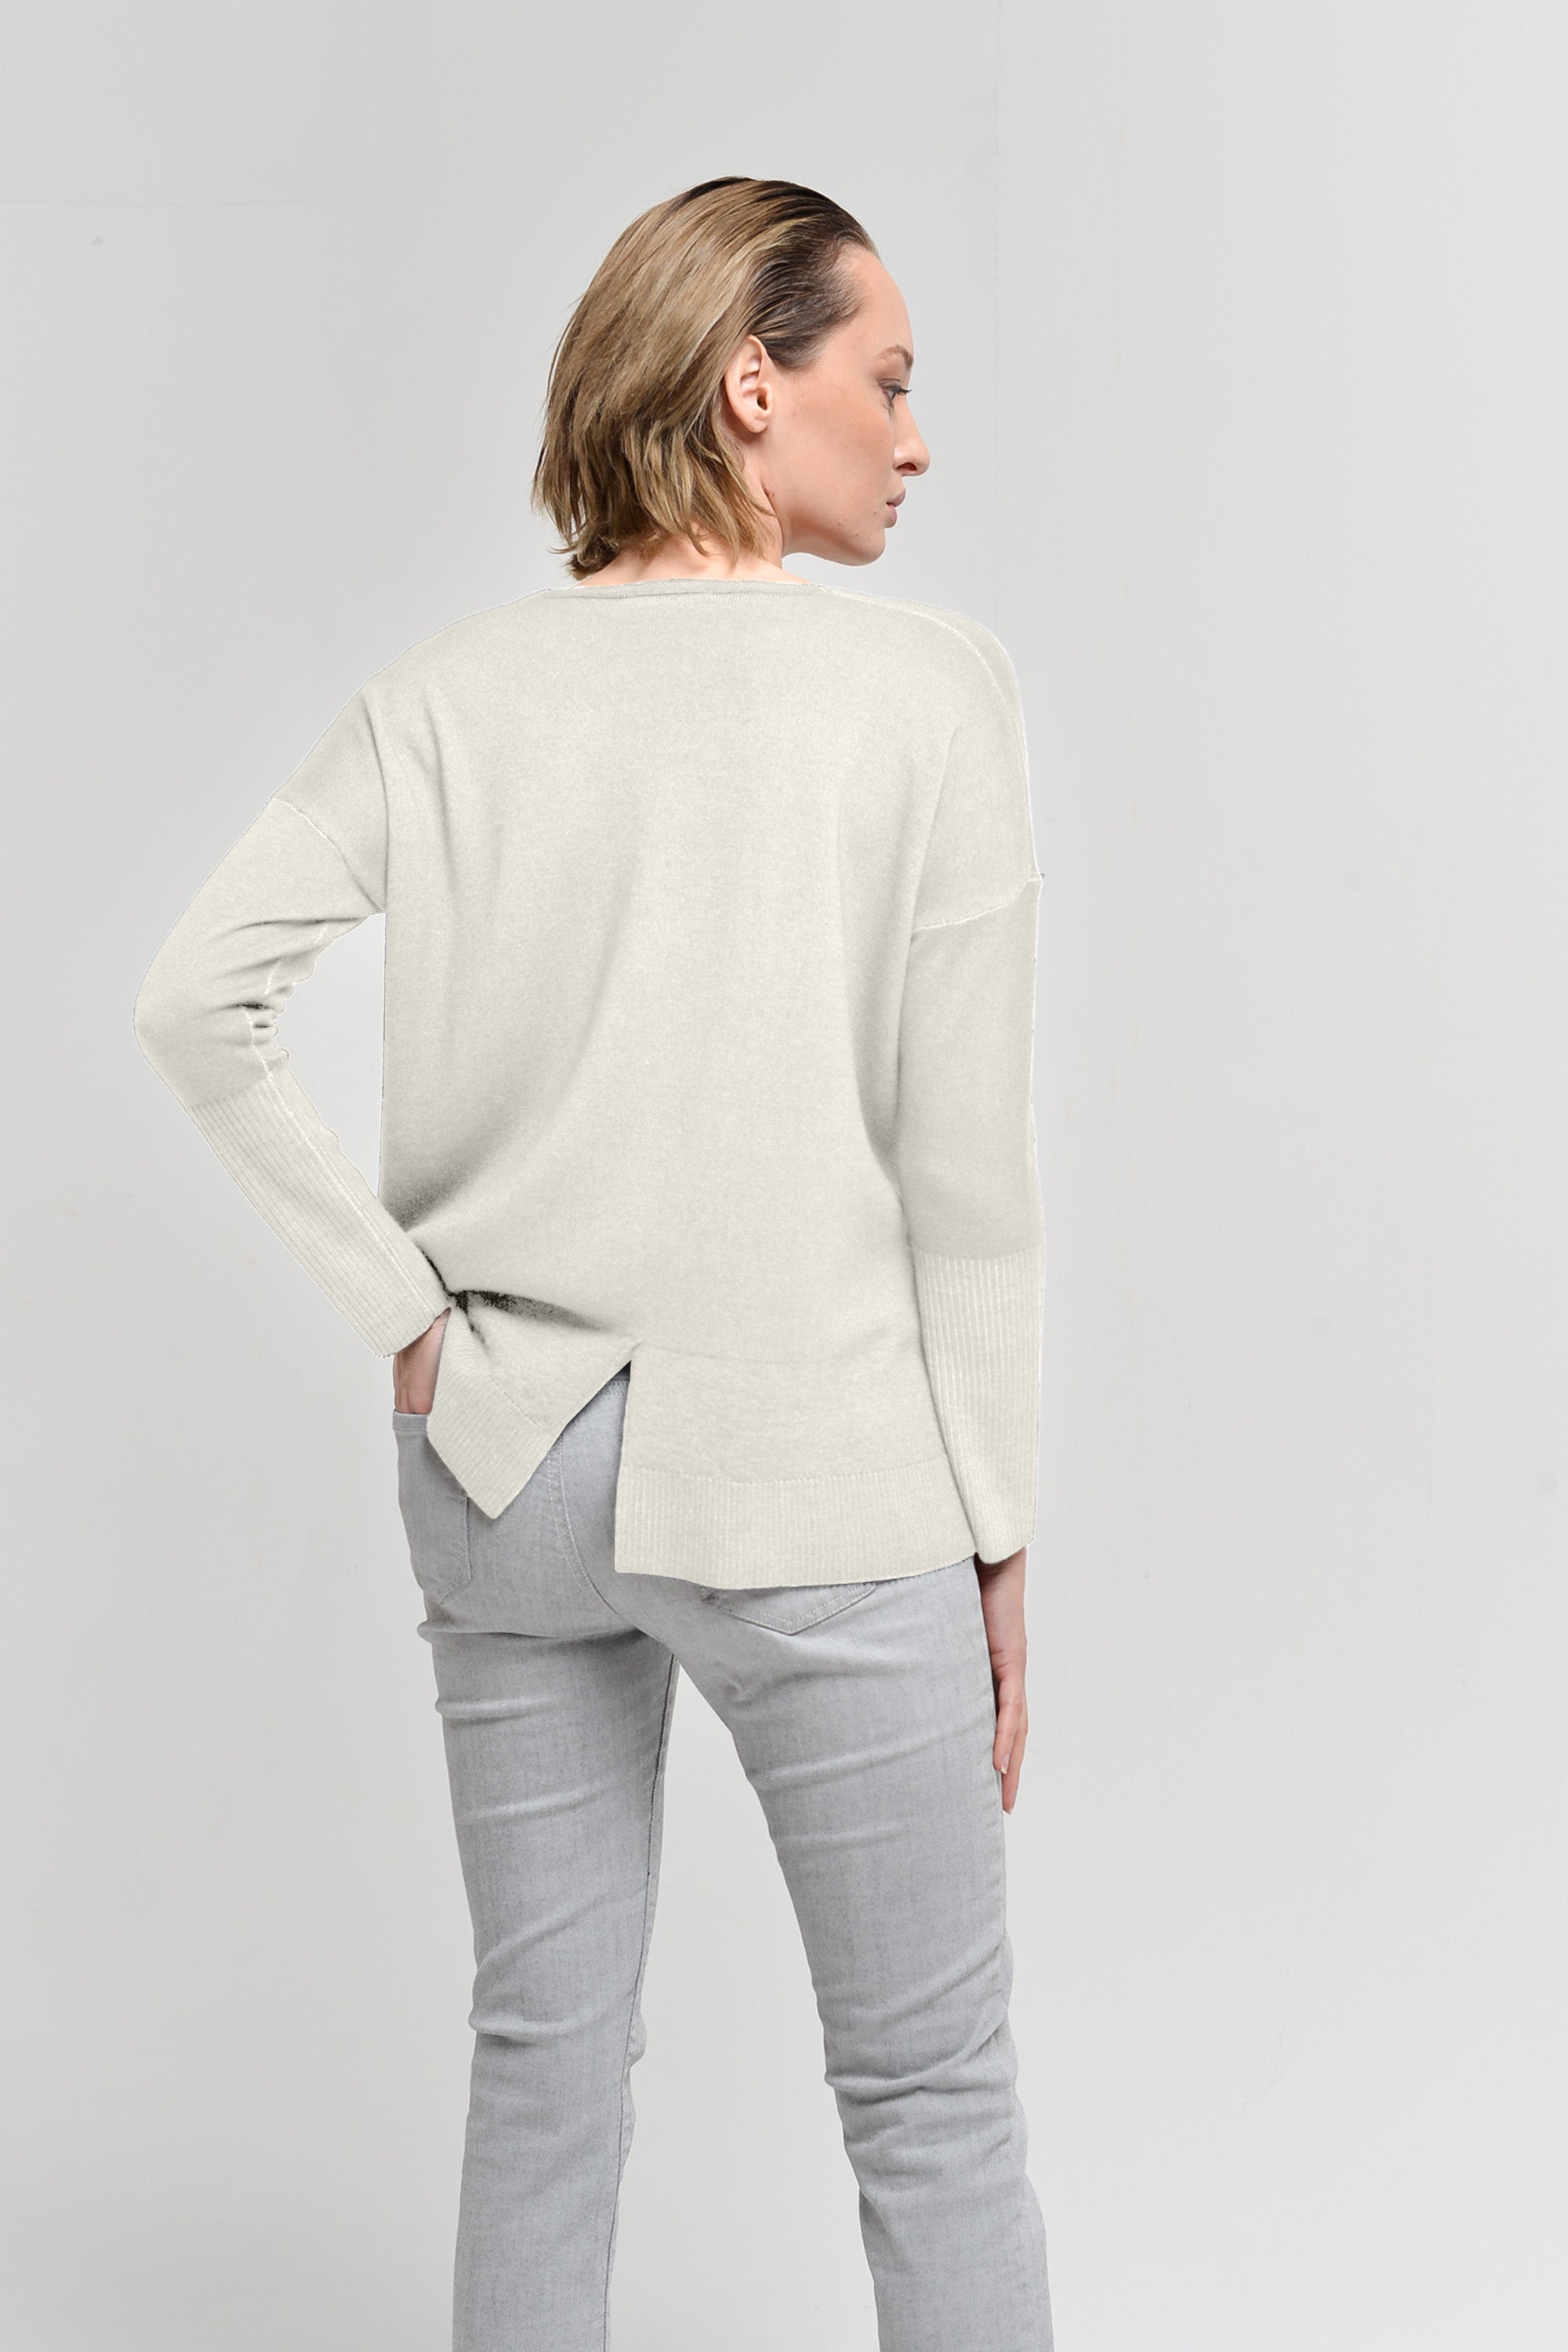 Coull Sweater - Foam